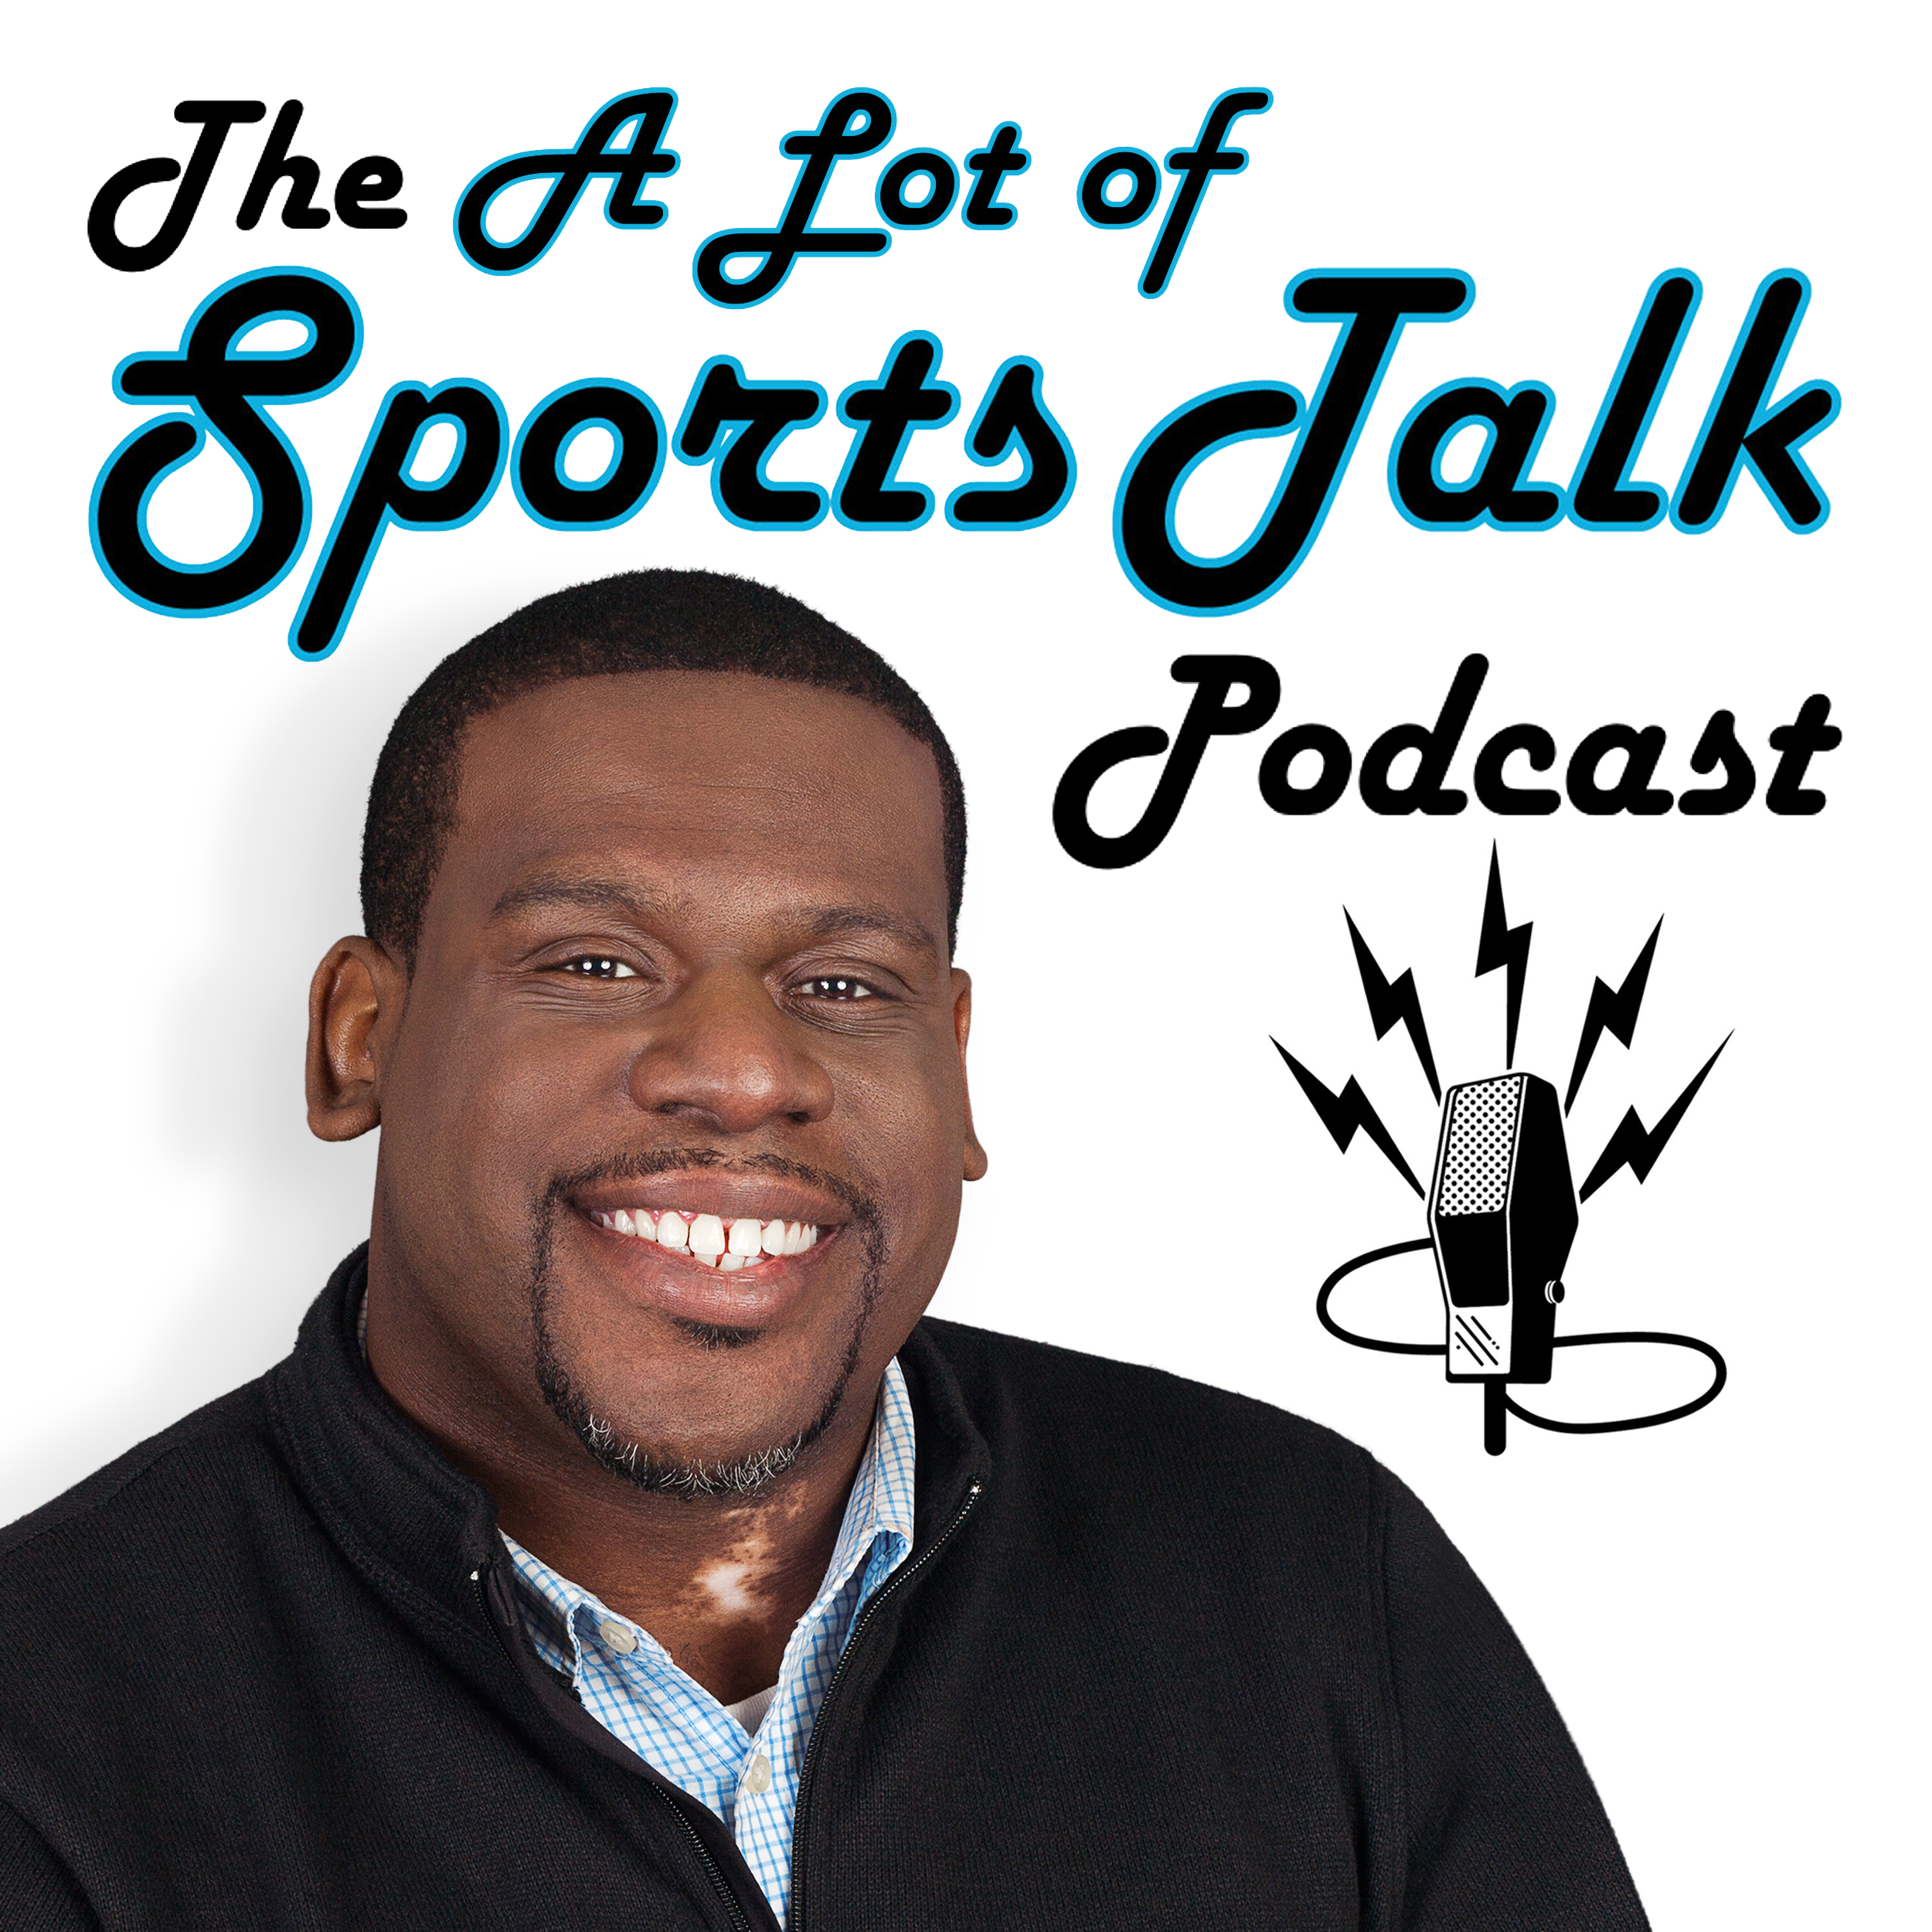 The 'A Lot of Sports Talk' Podcast